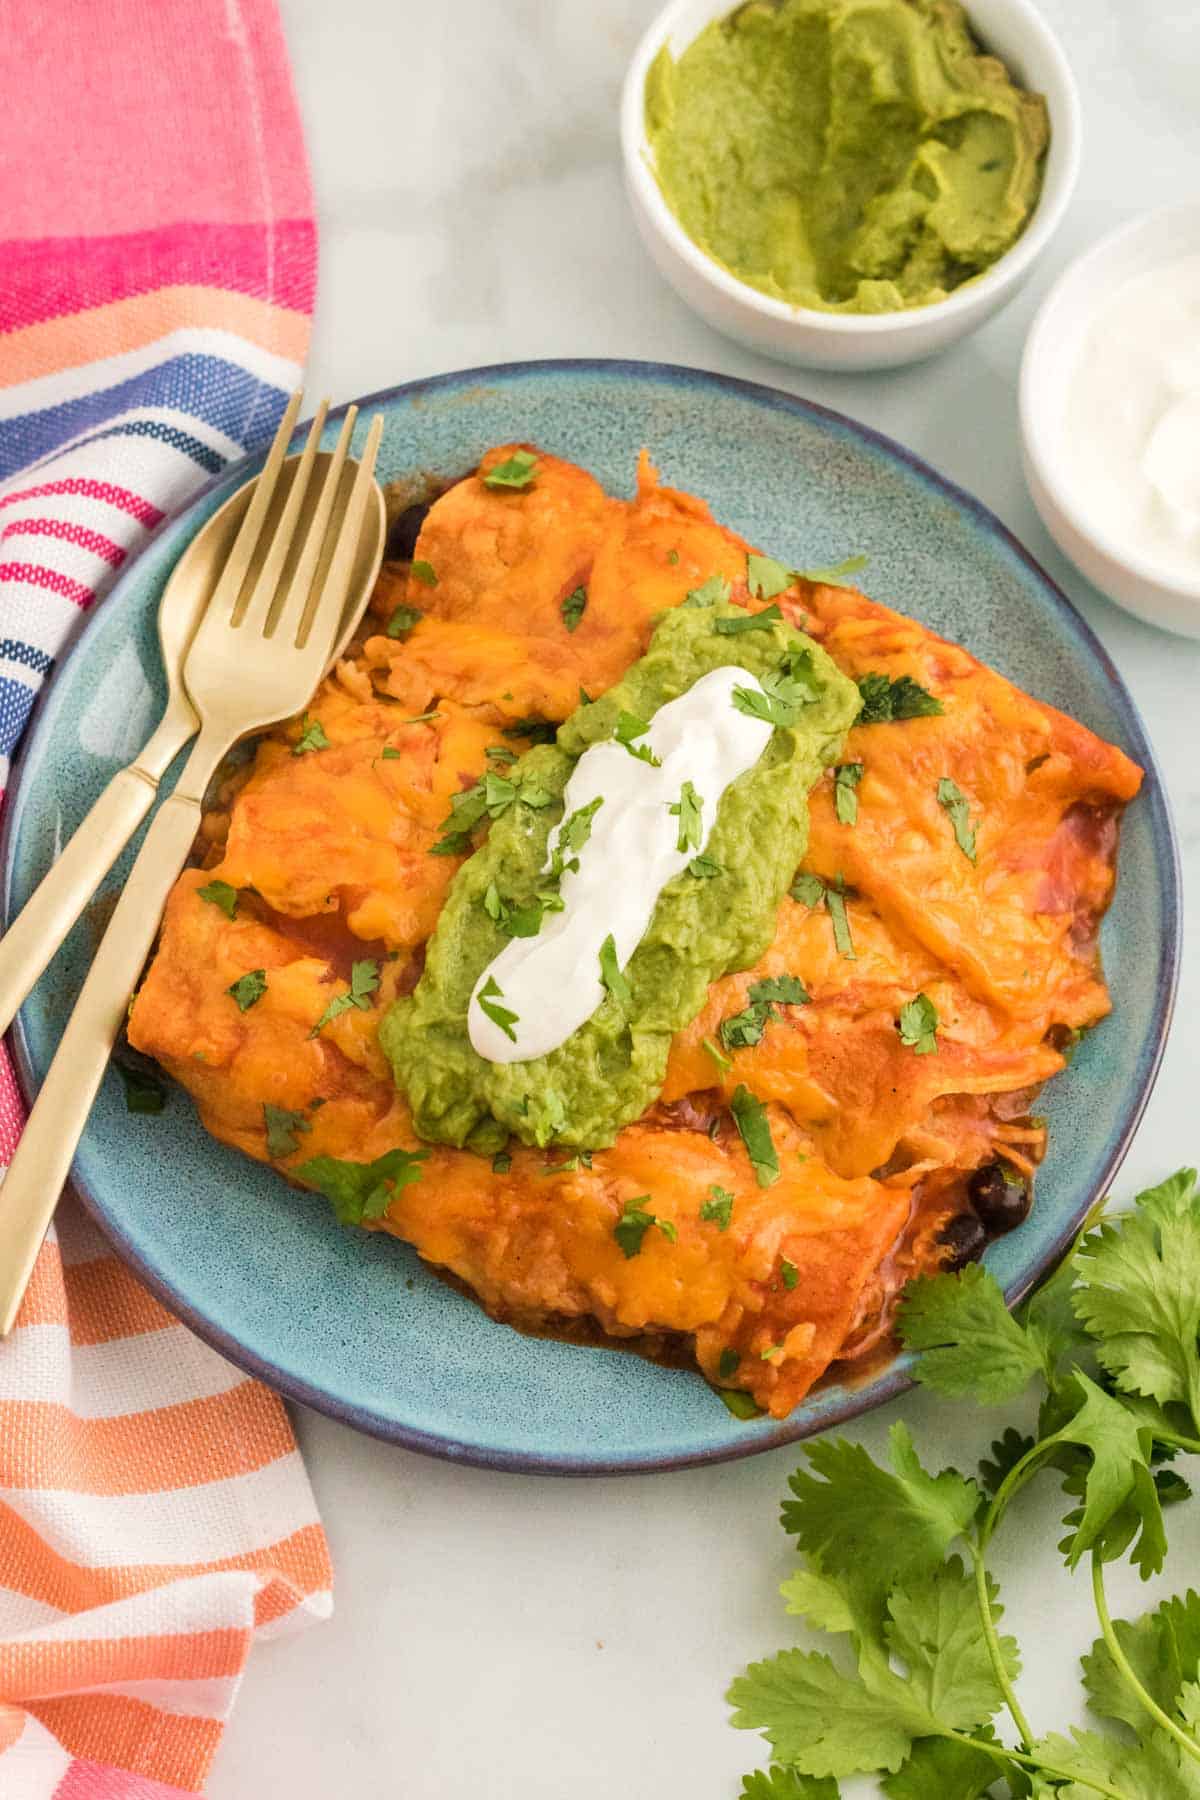 Chicken enchiladas garnished with guacamole and sour cream on a plate next to a fork.